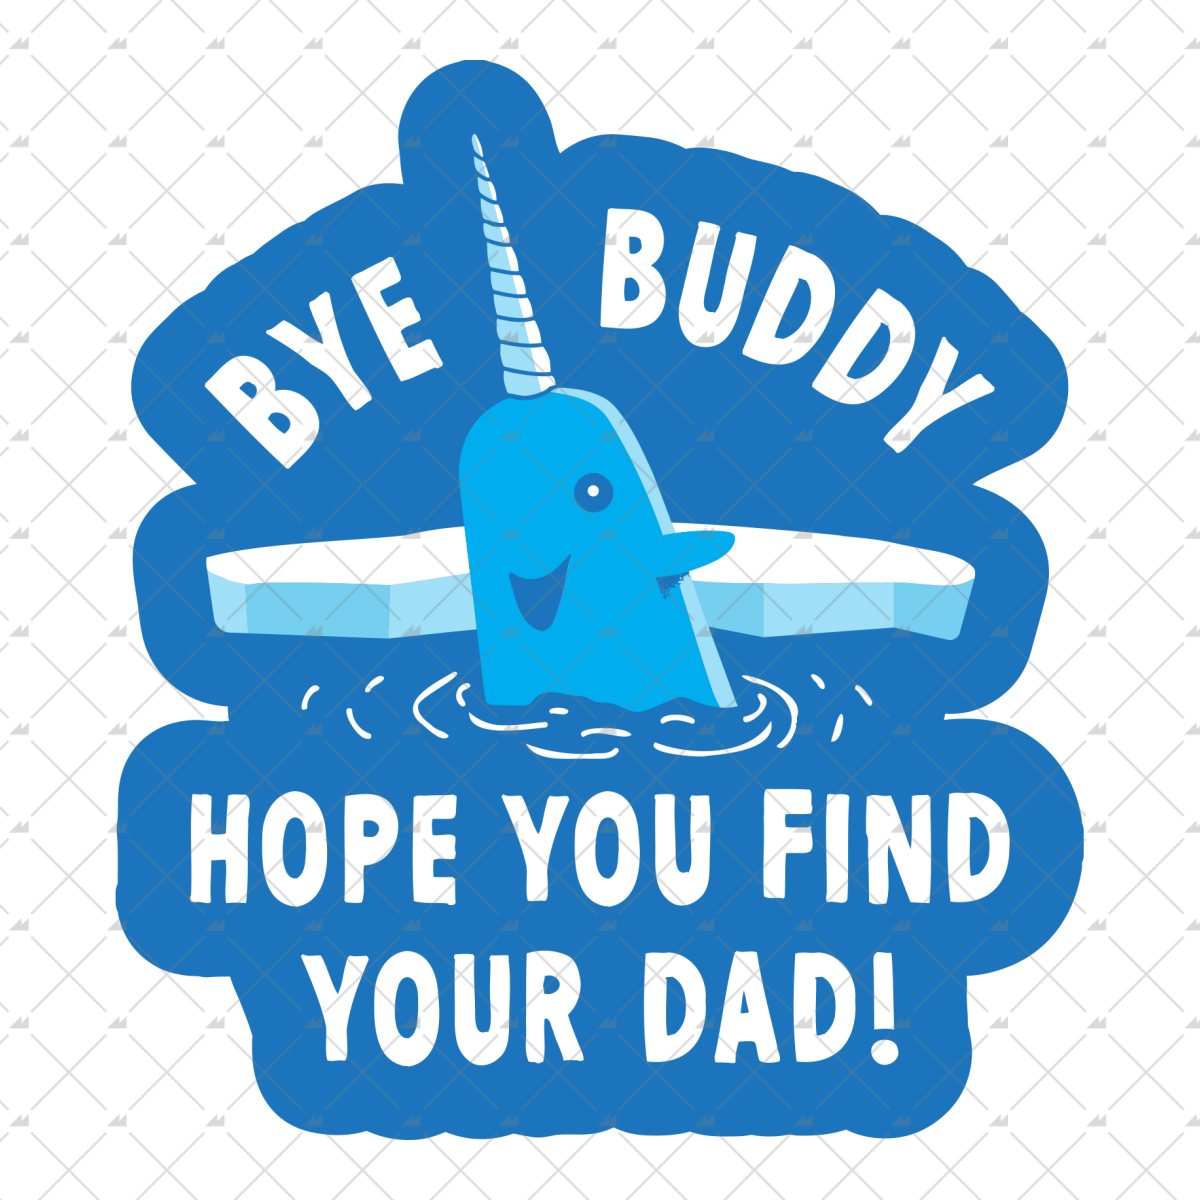 Bye Buddy Hope You Find Your Dad Sticker M00nshot